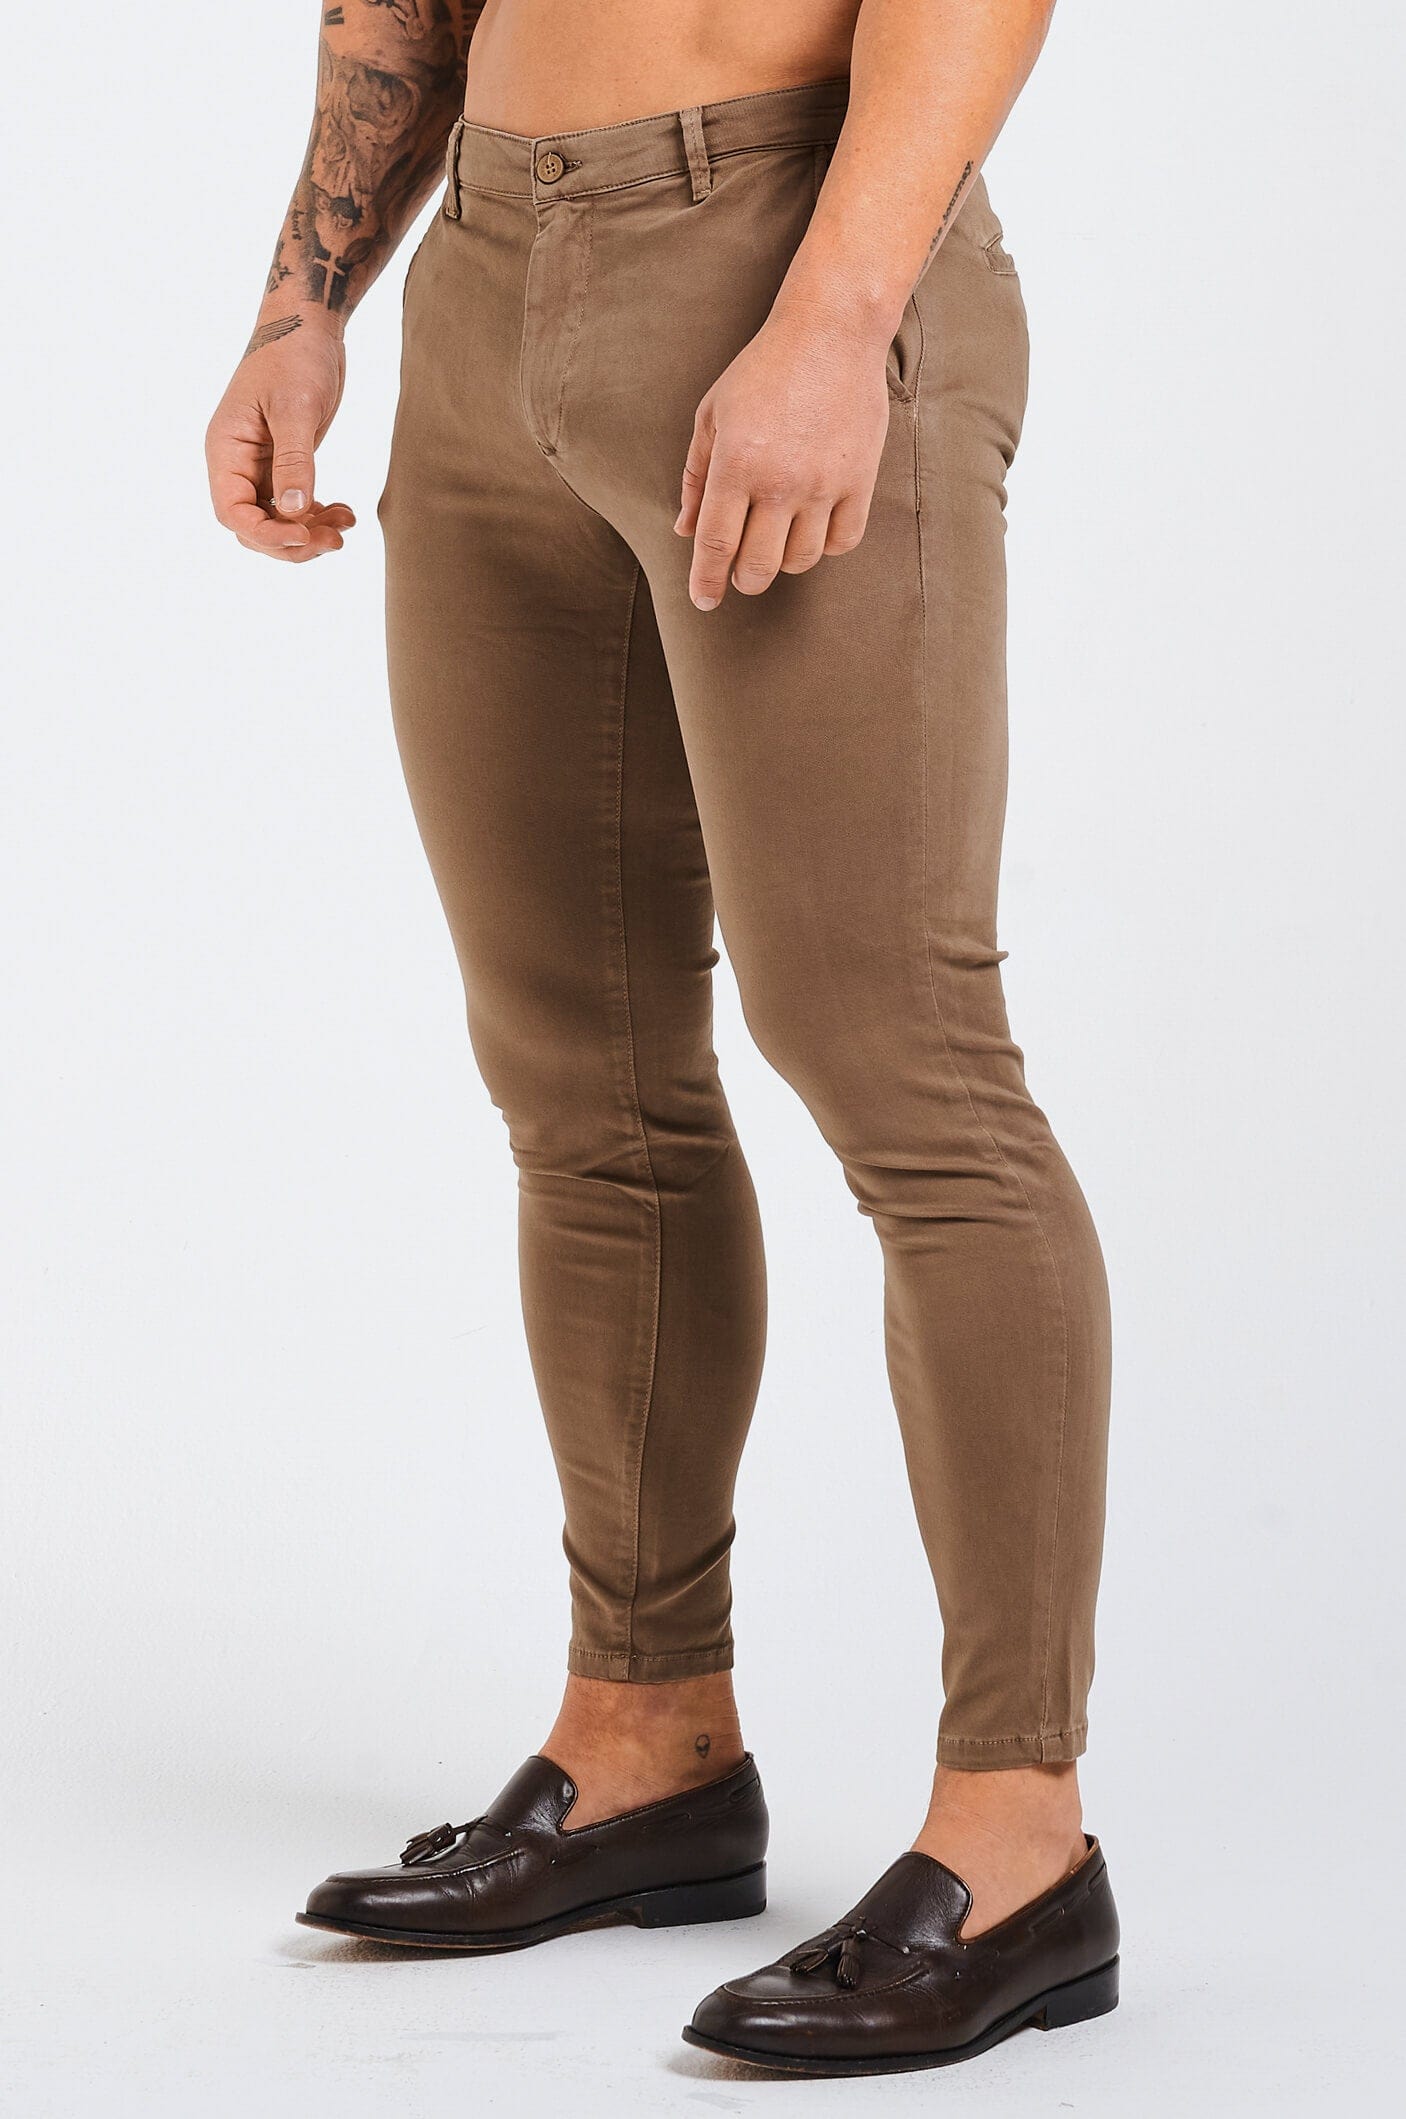 Legend London Trousers - chino SPRAY-ON STRETCH CHINO - TAUPE